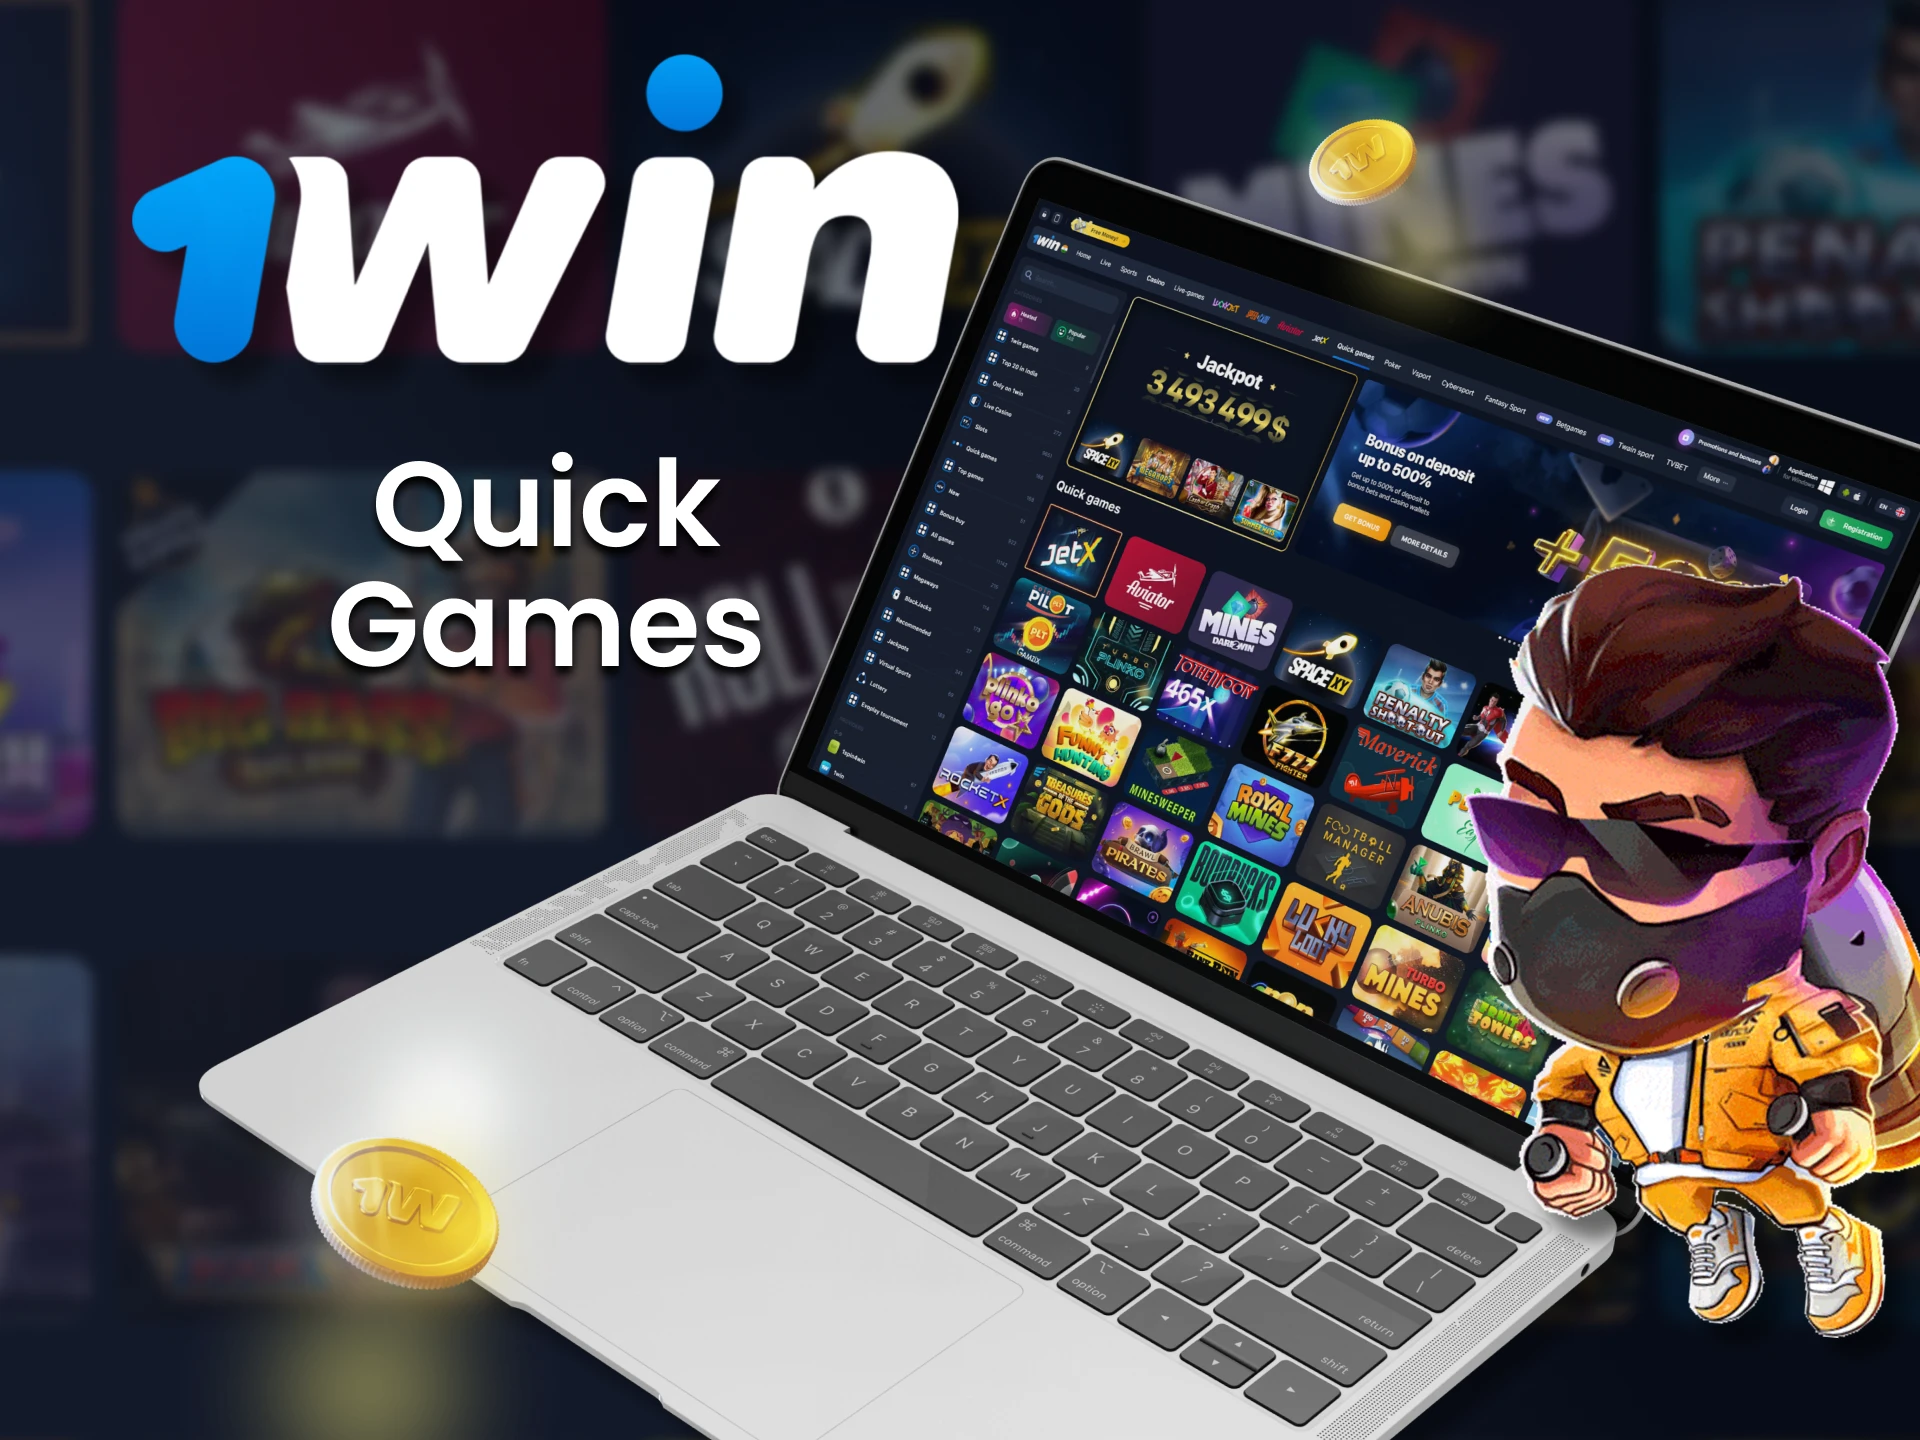 Play quick games on 1Win.